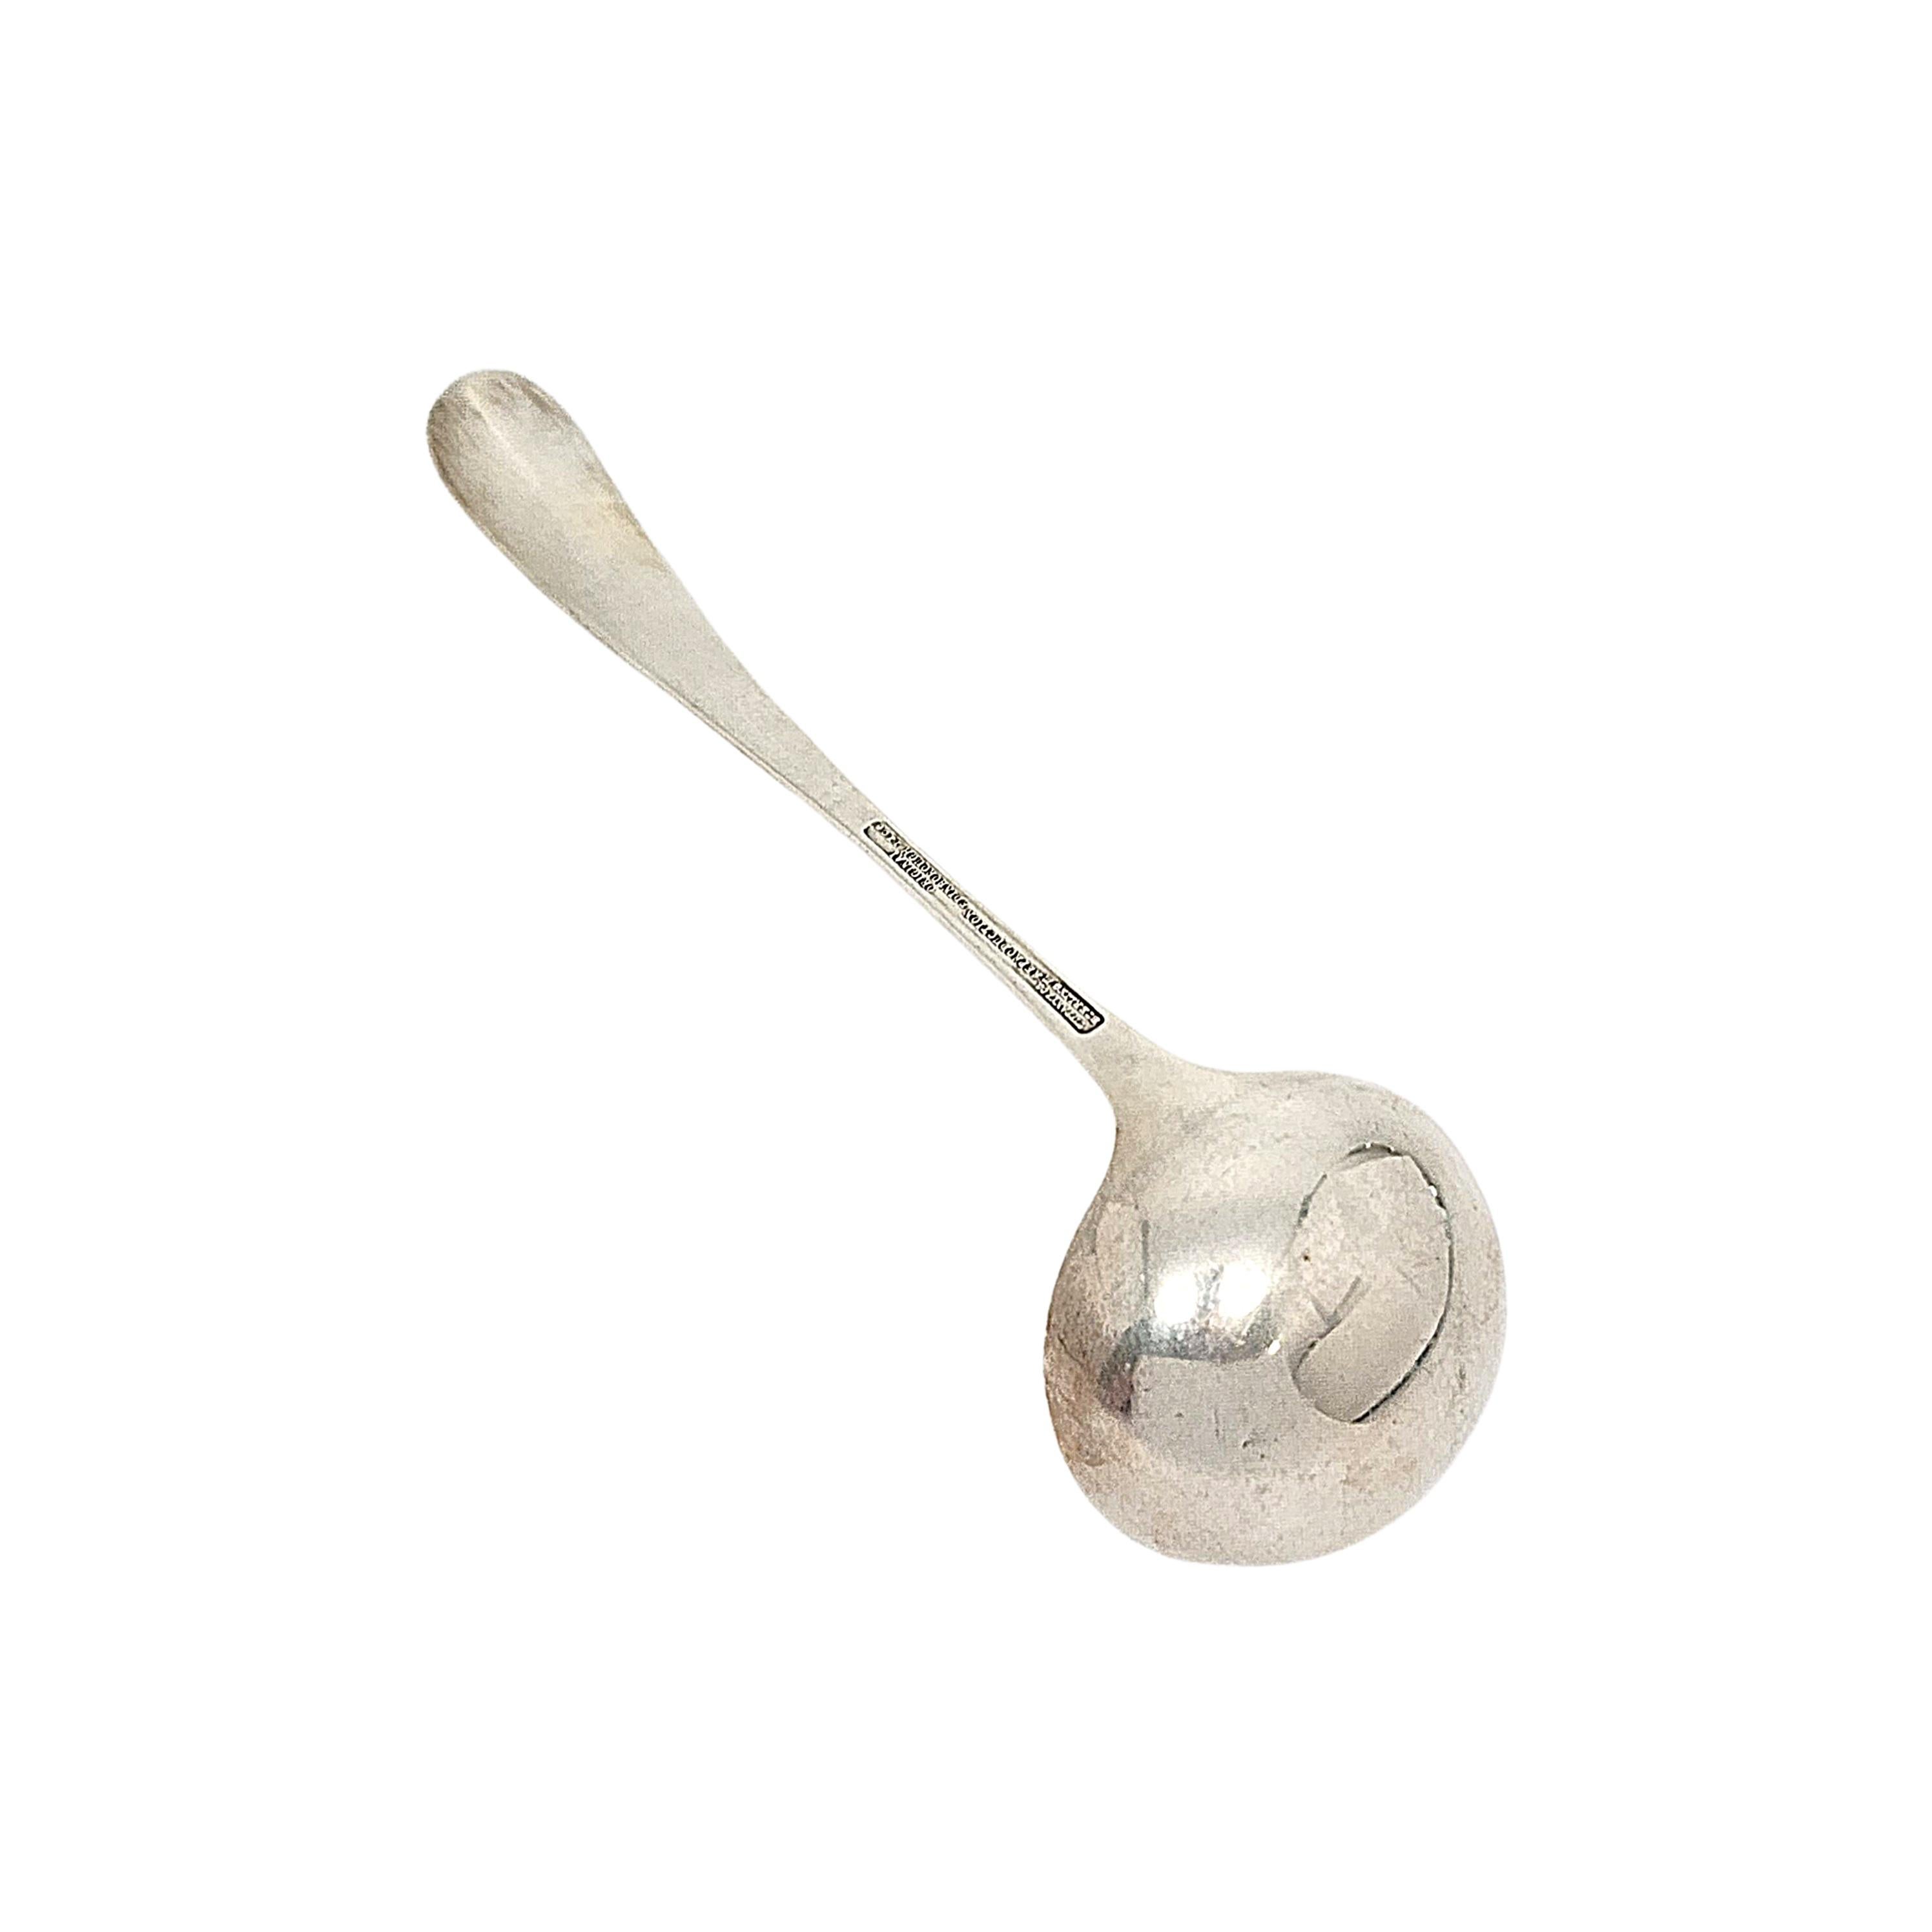 Sterling silver reproduction Edinborough ladle by Tiffany & Co.

No monogram

This small ladle features a simple and classic rounded handle design. Does not include Tiffany & Co box or pouch. The M mark on this spoon dates it to manufacture under